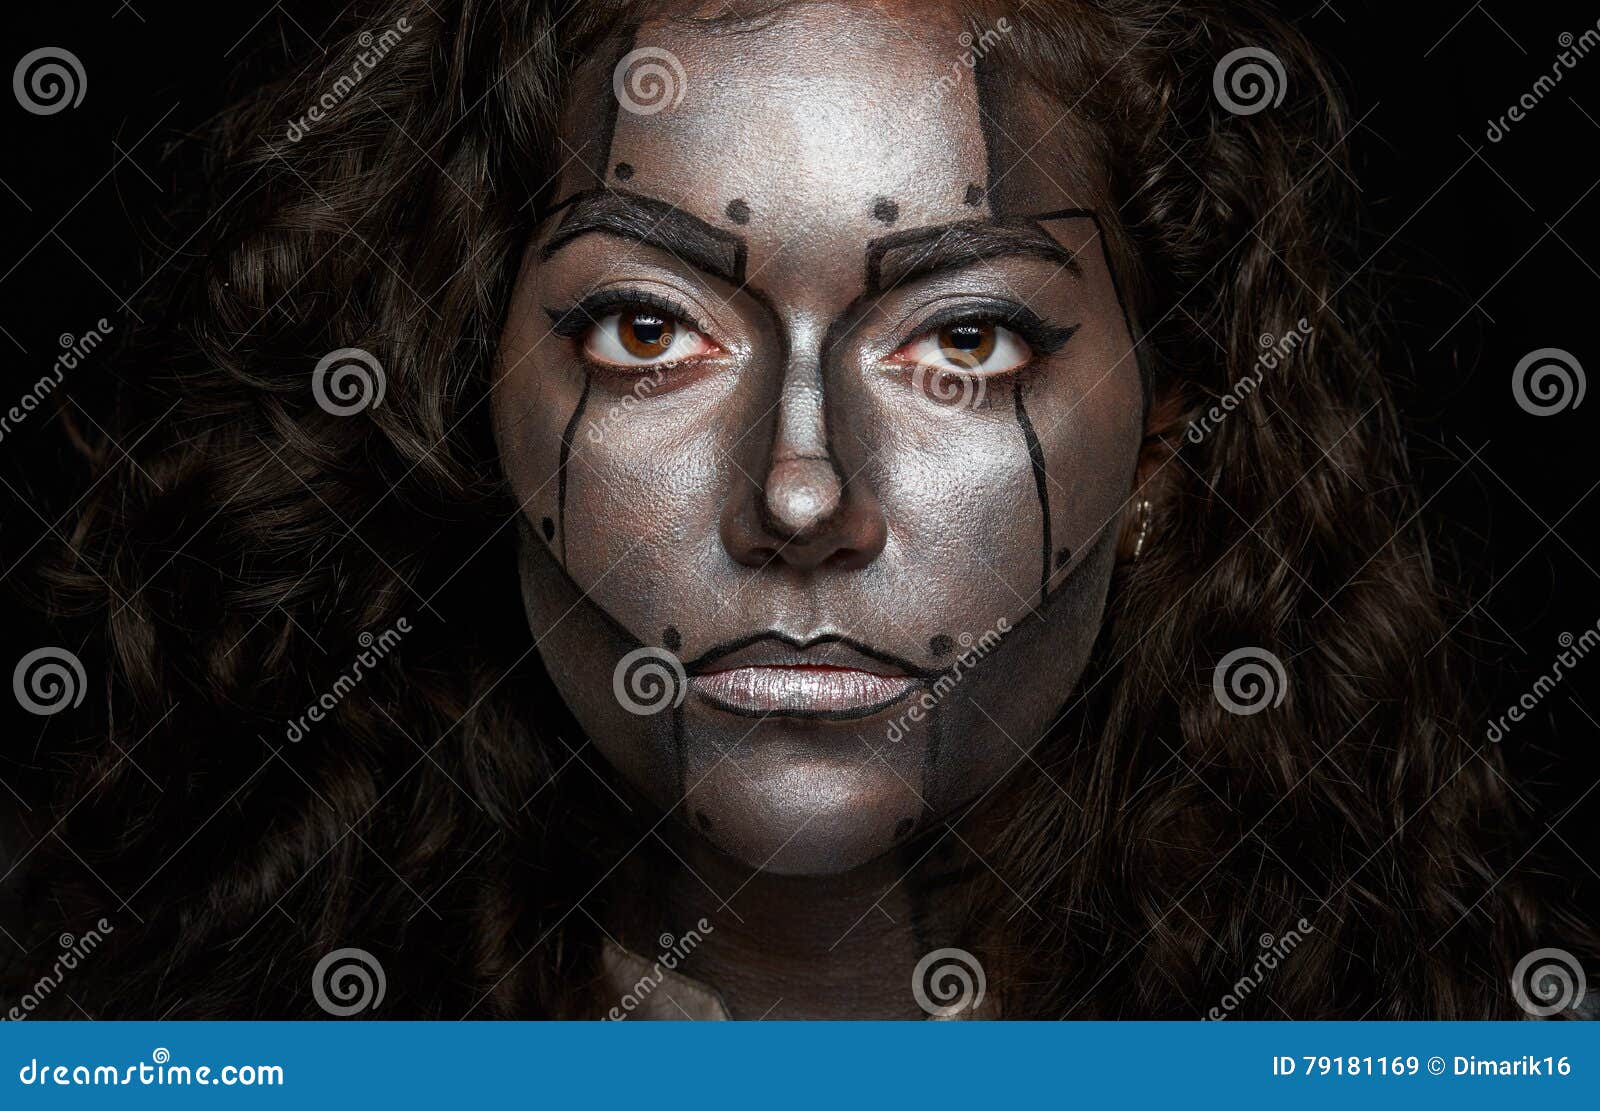 Close up of women face stock image. Image of model, halloween - 79181169